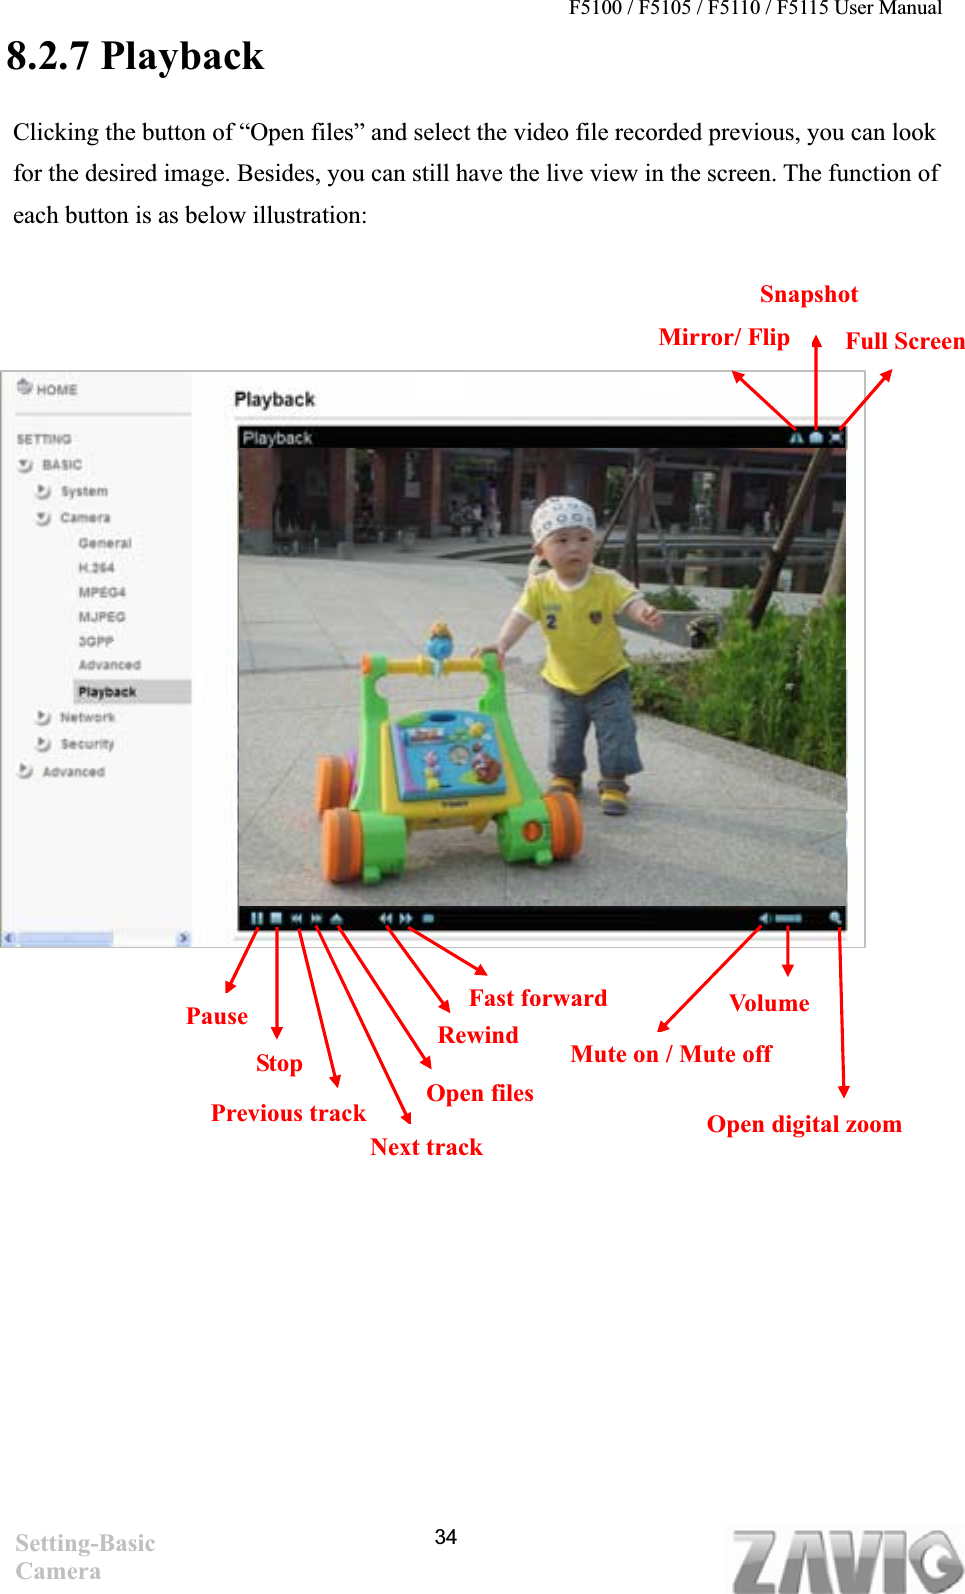 F5100 / F5105 / F5110 / F5115 User Manual   8.2.7 PlaybackClicking the button of “Open files” and select the video file recorded previous, you can look for the desired image. Besides, you can still have the live view in the screen. The function of each button is as below illustration:       Open digital zoom Volume Mute on / Mute off Fast forwardRewindOpen files Next track Stop PausePrevious trackFull Screen Mirror/ Flip SnapshotSetting-Basic Camera34